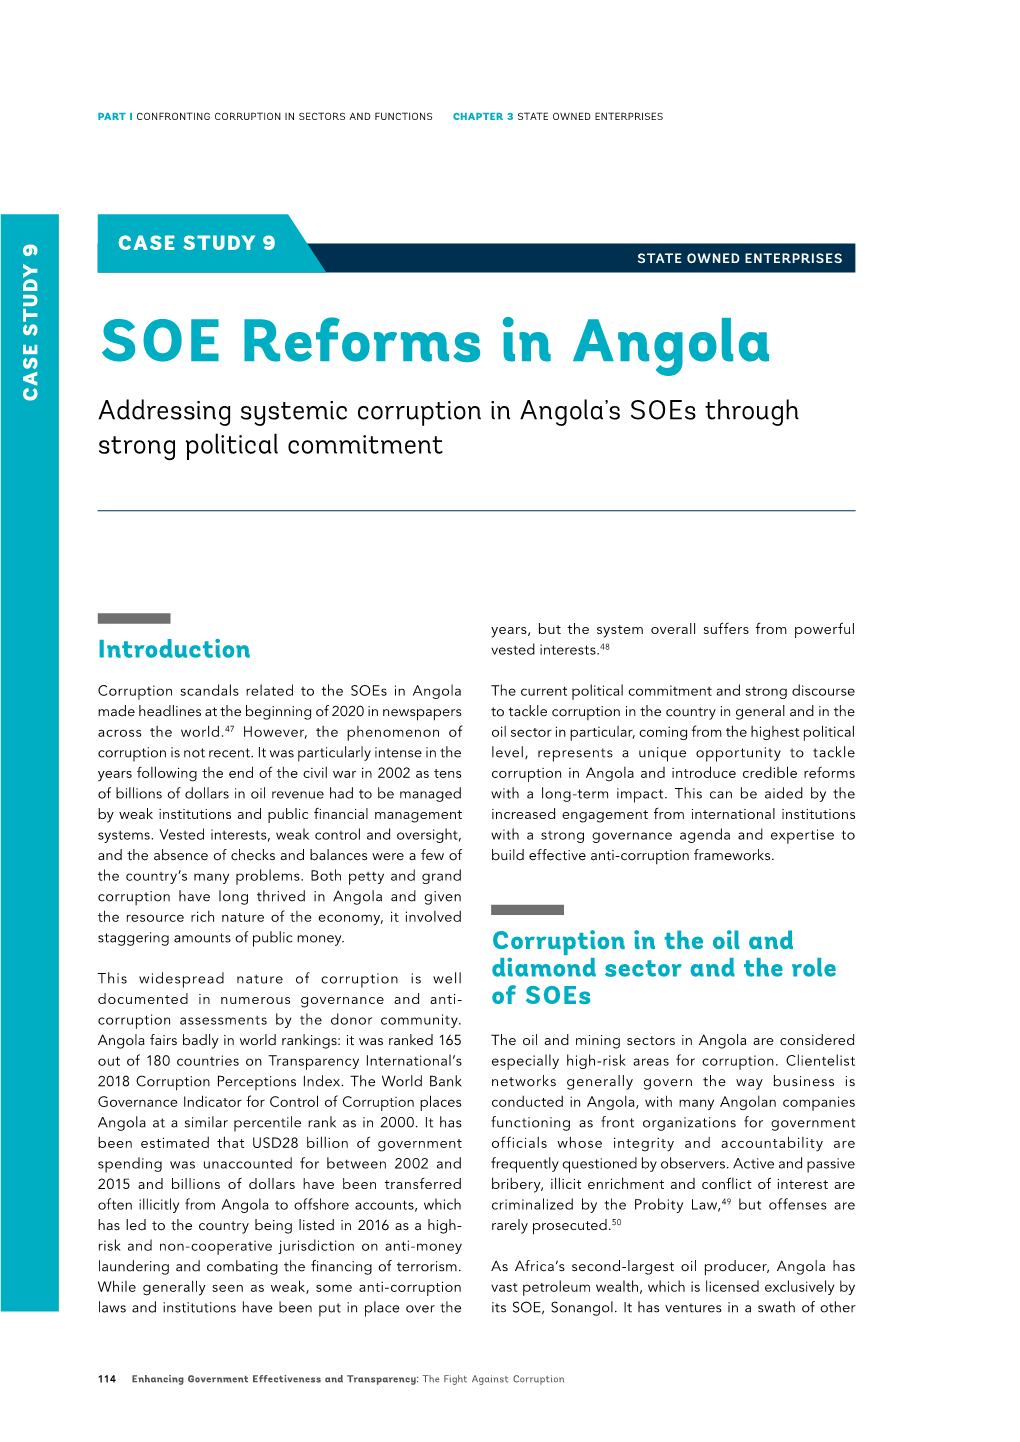 SOE Reforms in Angola CASE STUDY 9 Addressing Systemic Corruption in Angola’S Soes Through Strong Political Commitment